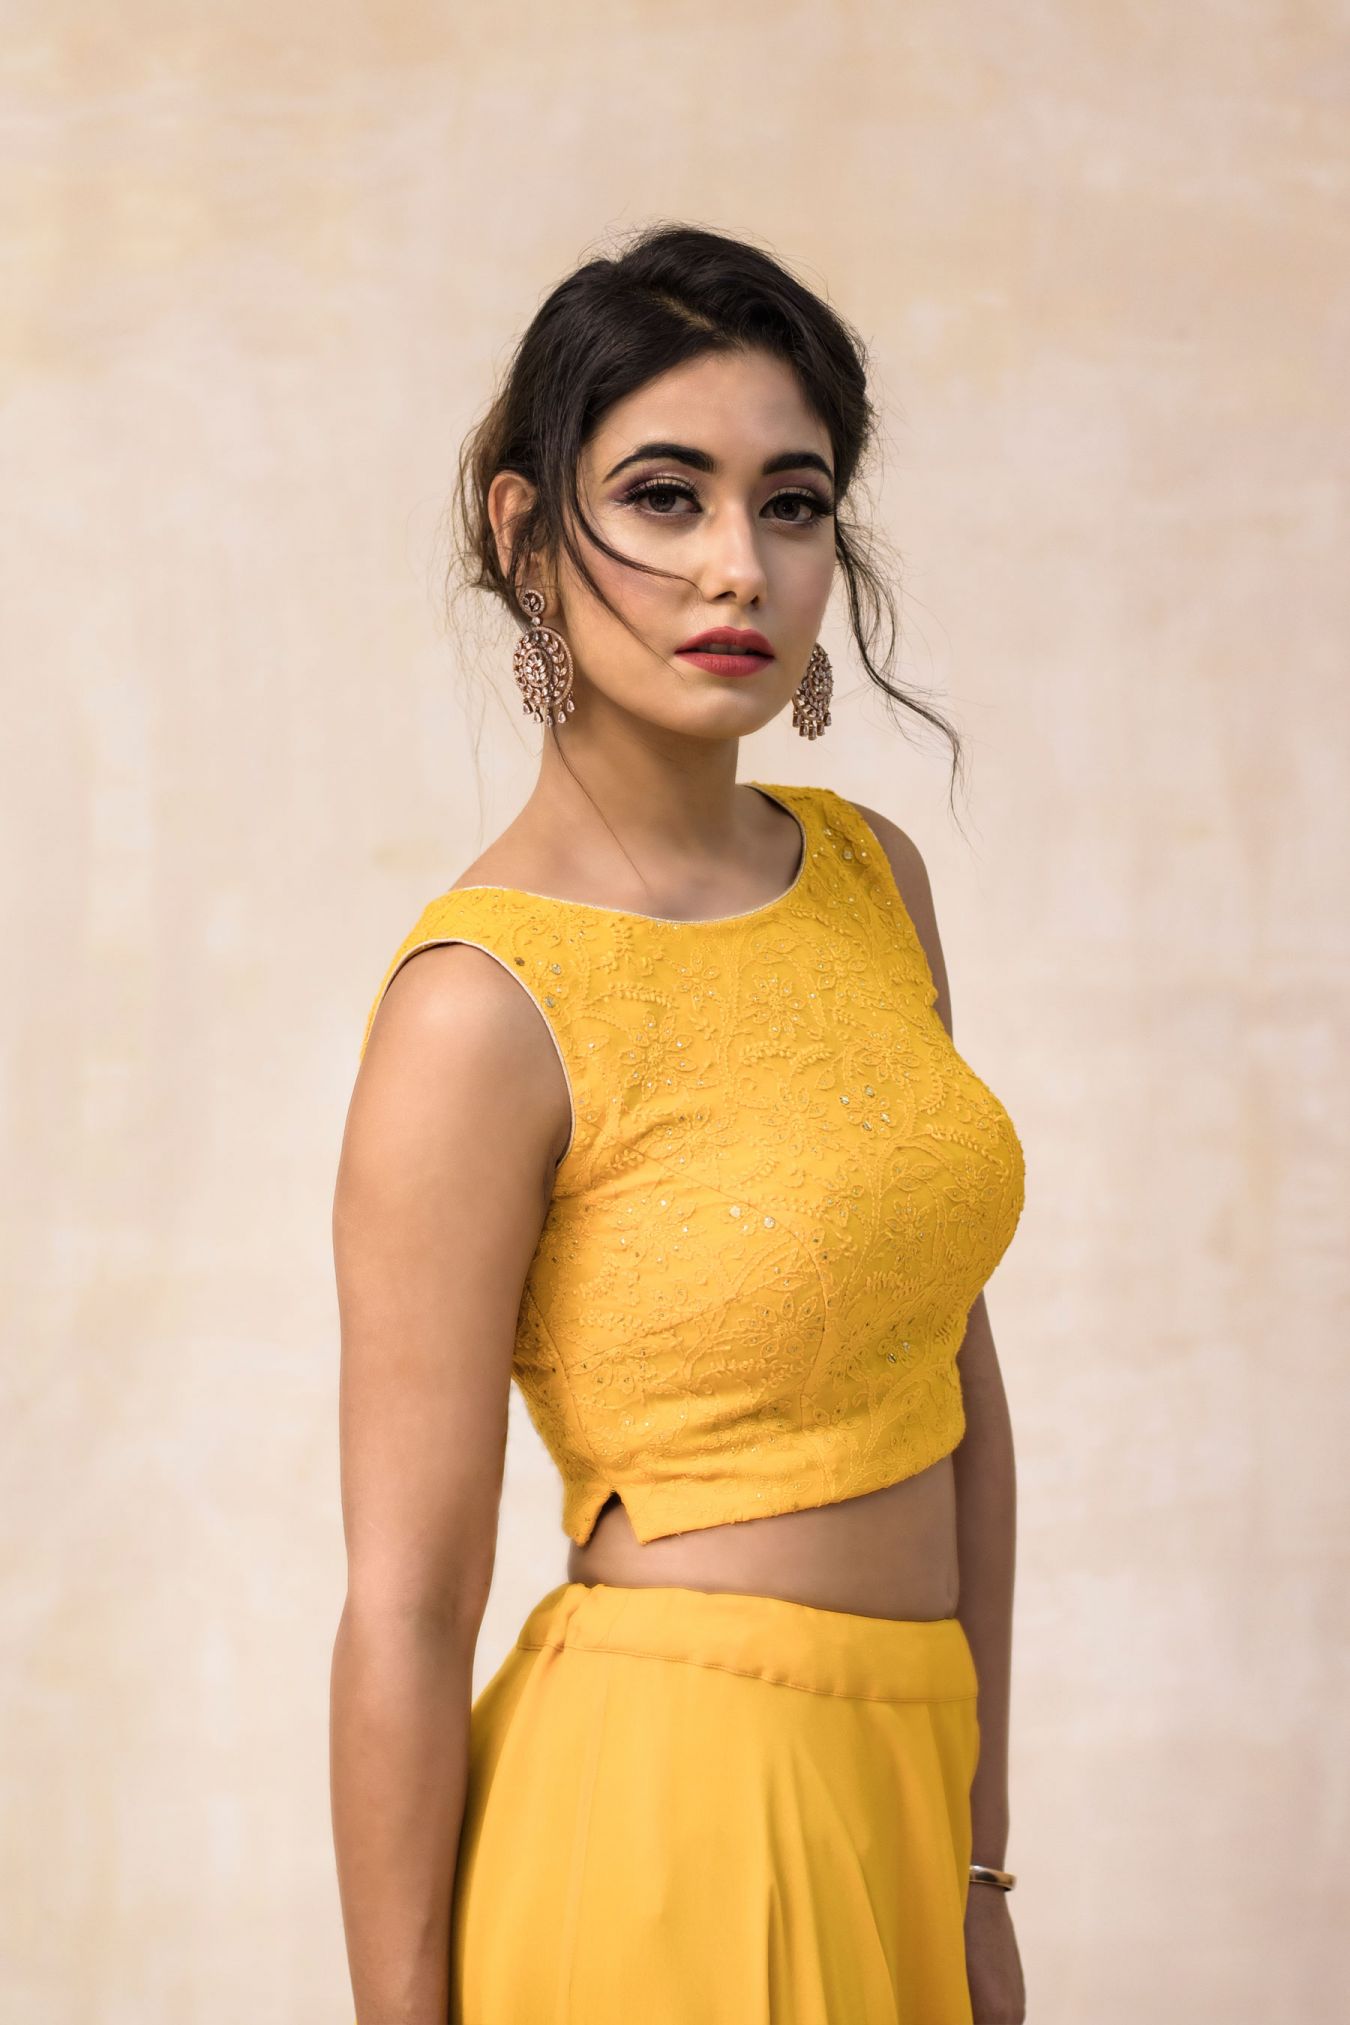 Ablaze Handcrafted Chikan Mukaish Georgette Skirt Top Set in Magnificent Mustard Yellow Hue